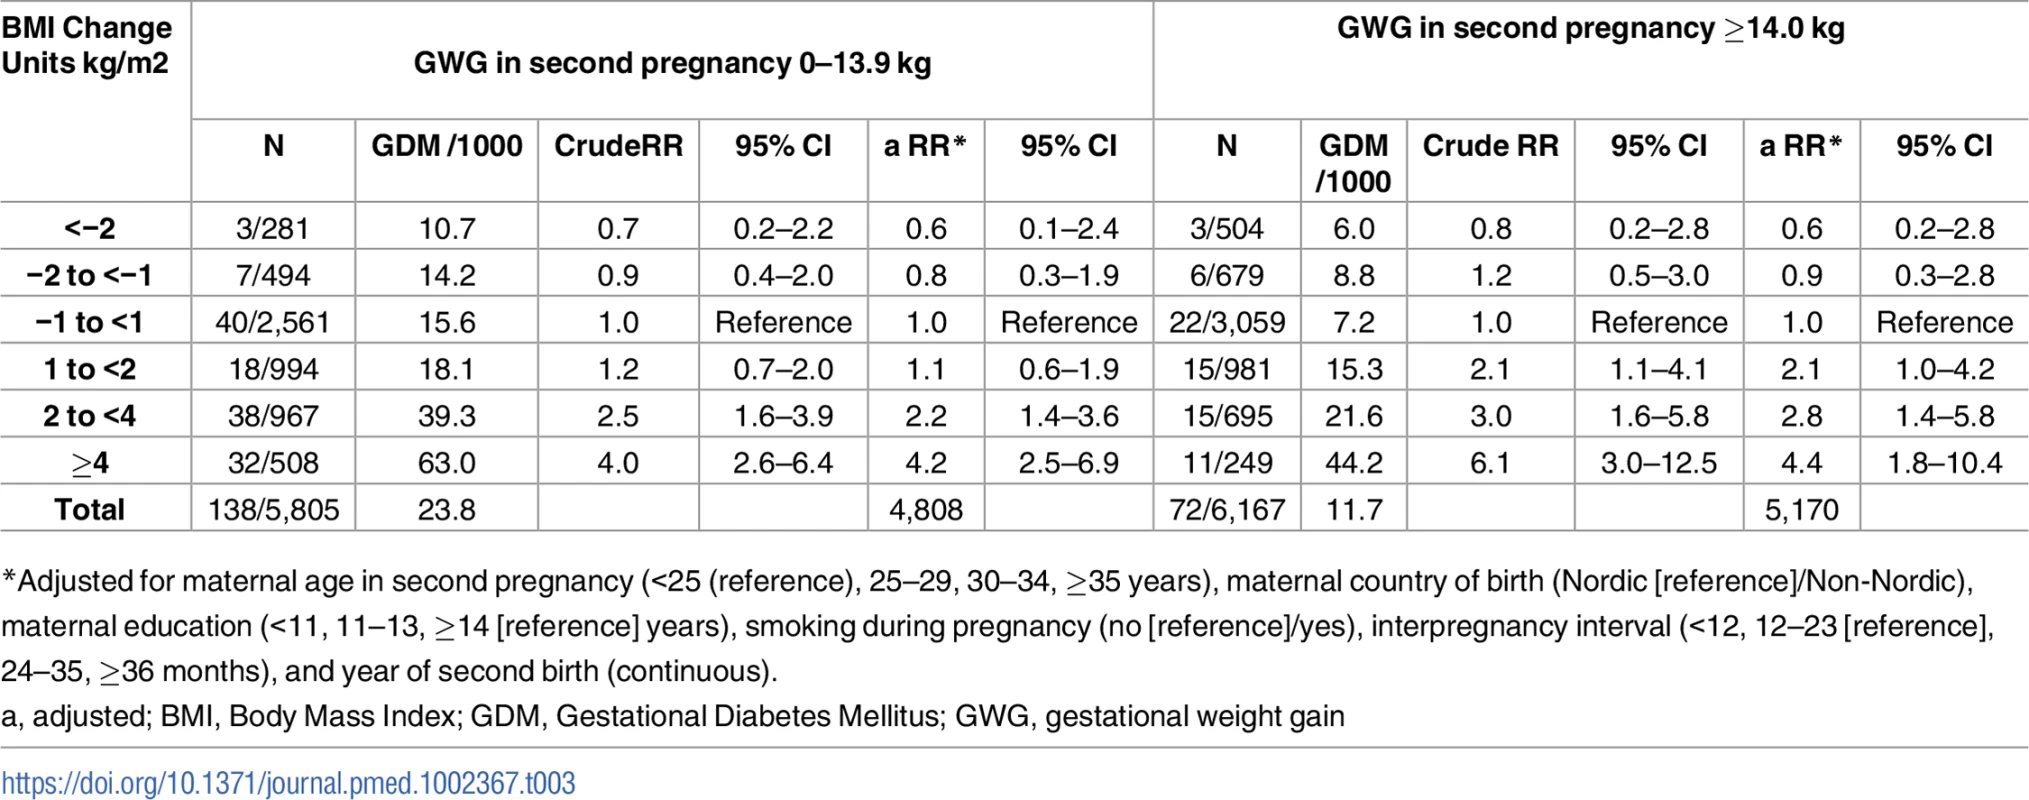 RR for GDM in second pregnancy by interpregnancy change in BMI, stratified by GWG in second pregnancy (<i>n</i> = 11,972), The Medical Birth Registry of Norway 2006–2014.